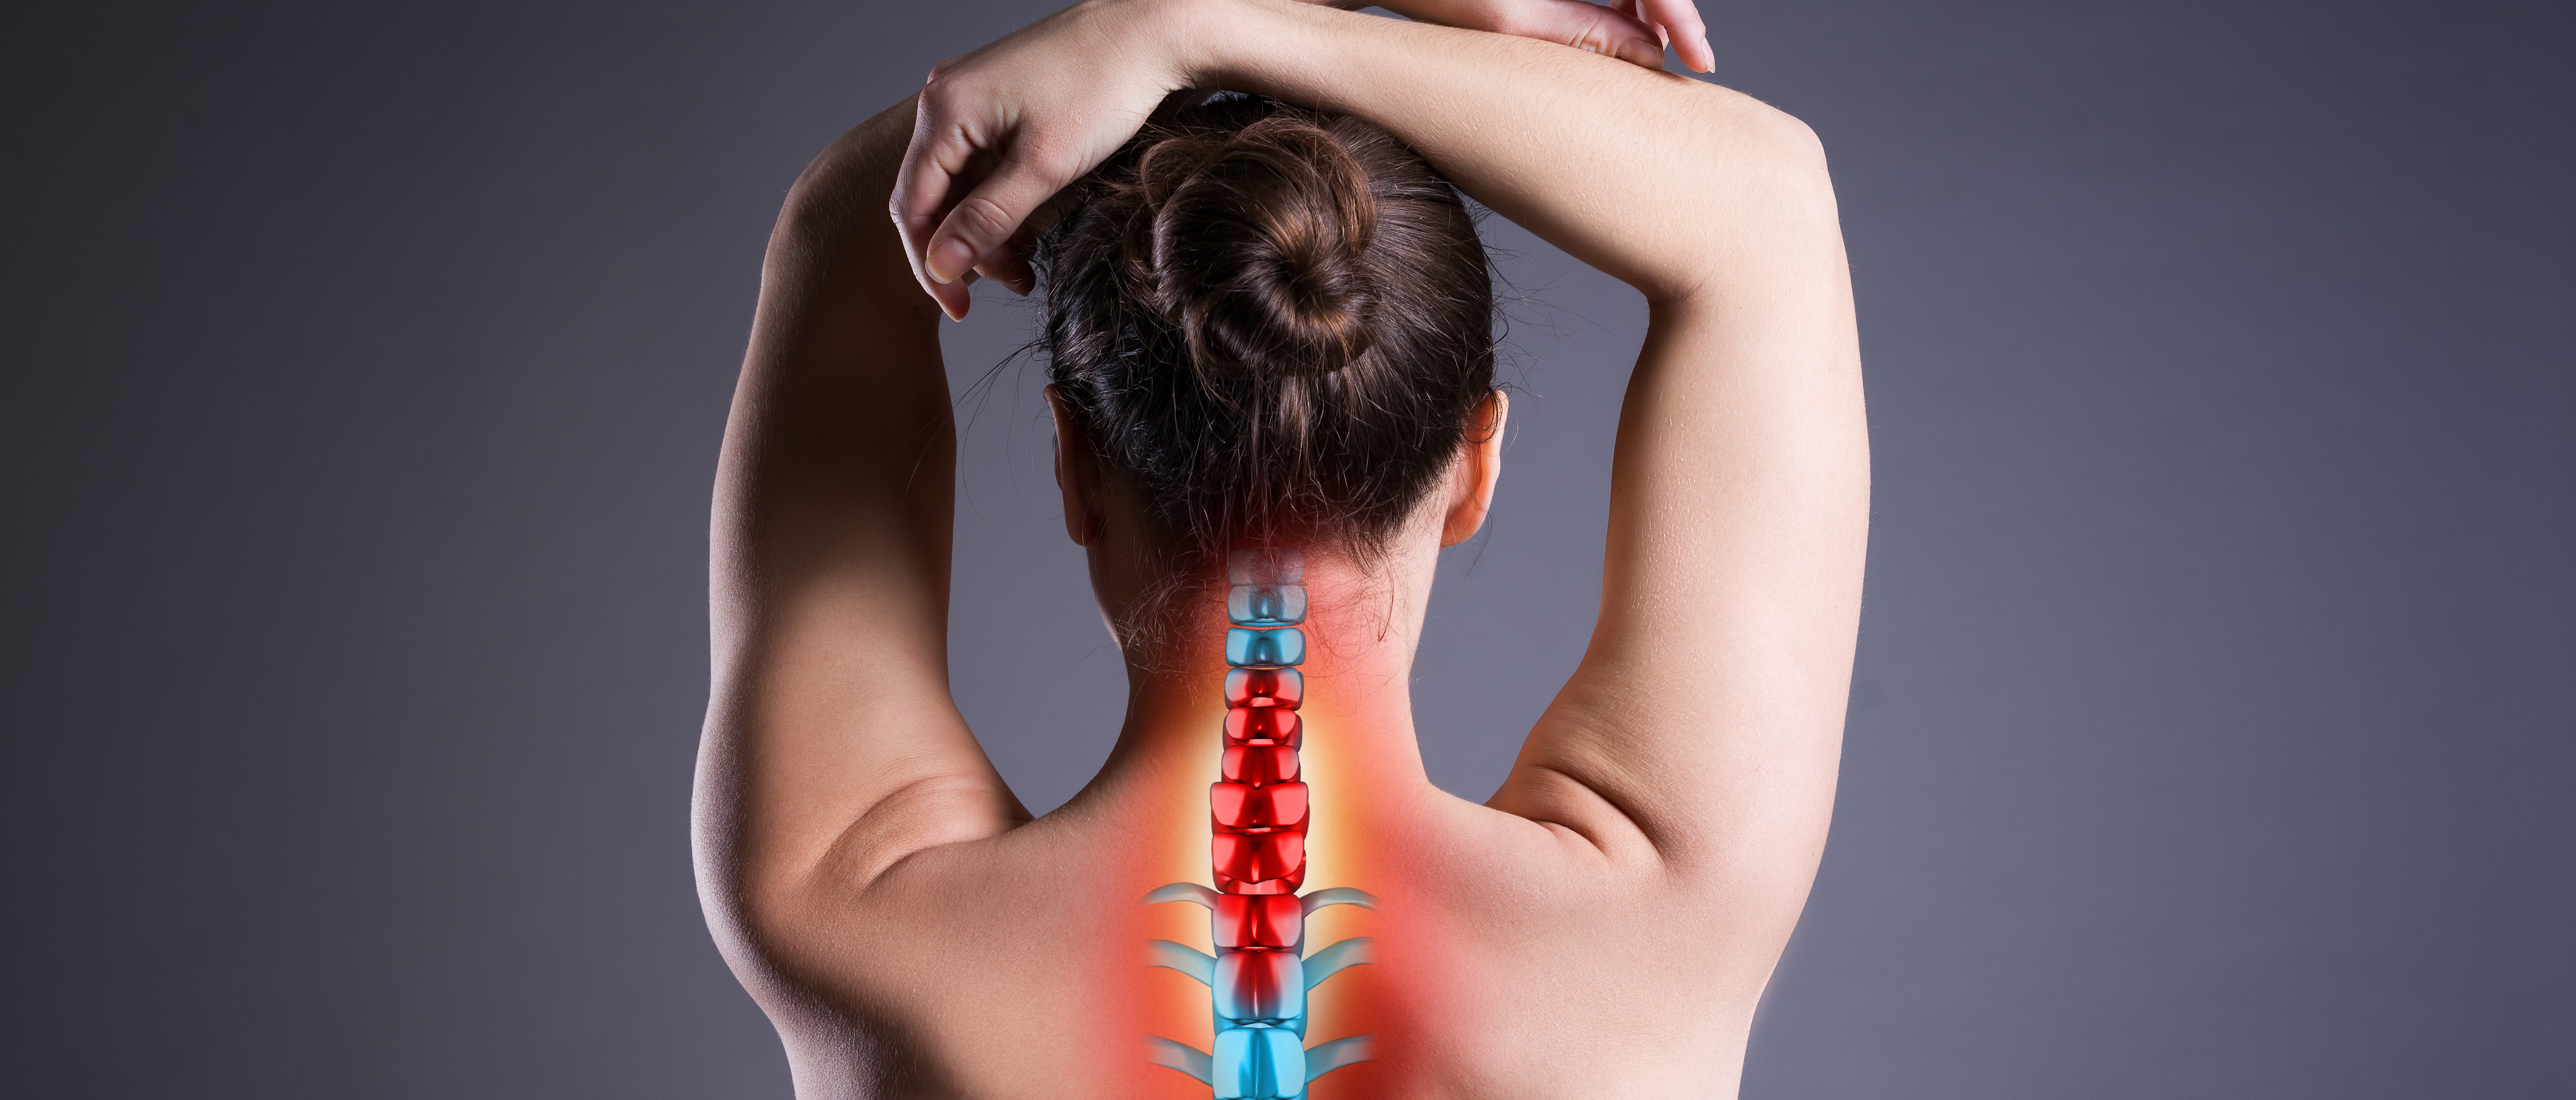 A medical concept image of a womans upper back with her spine highlighted, the woman spine is showing signs of a herniated cervical disc and is illustrated by highlighting the area where its located.